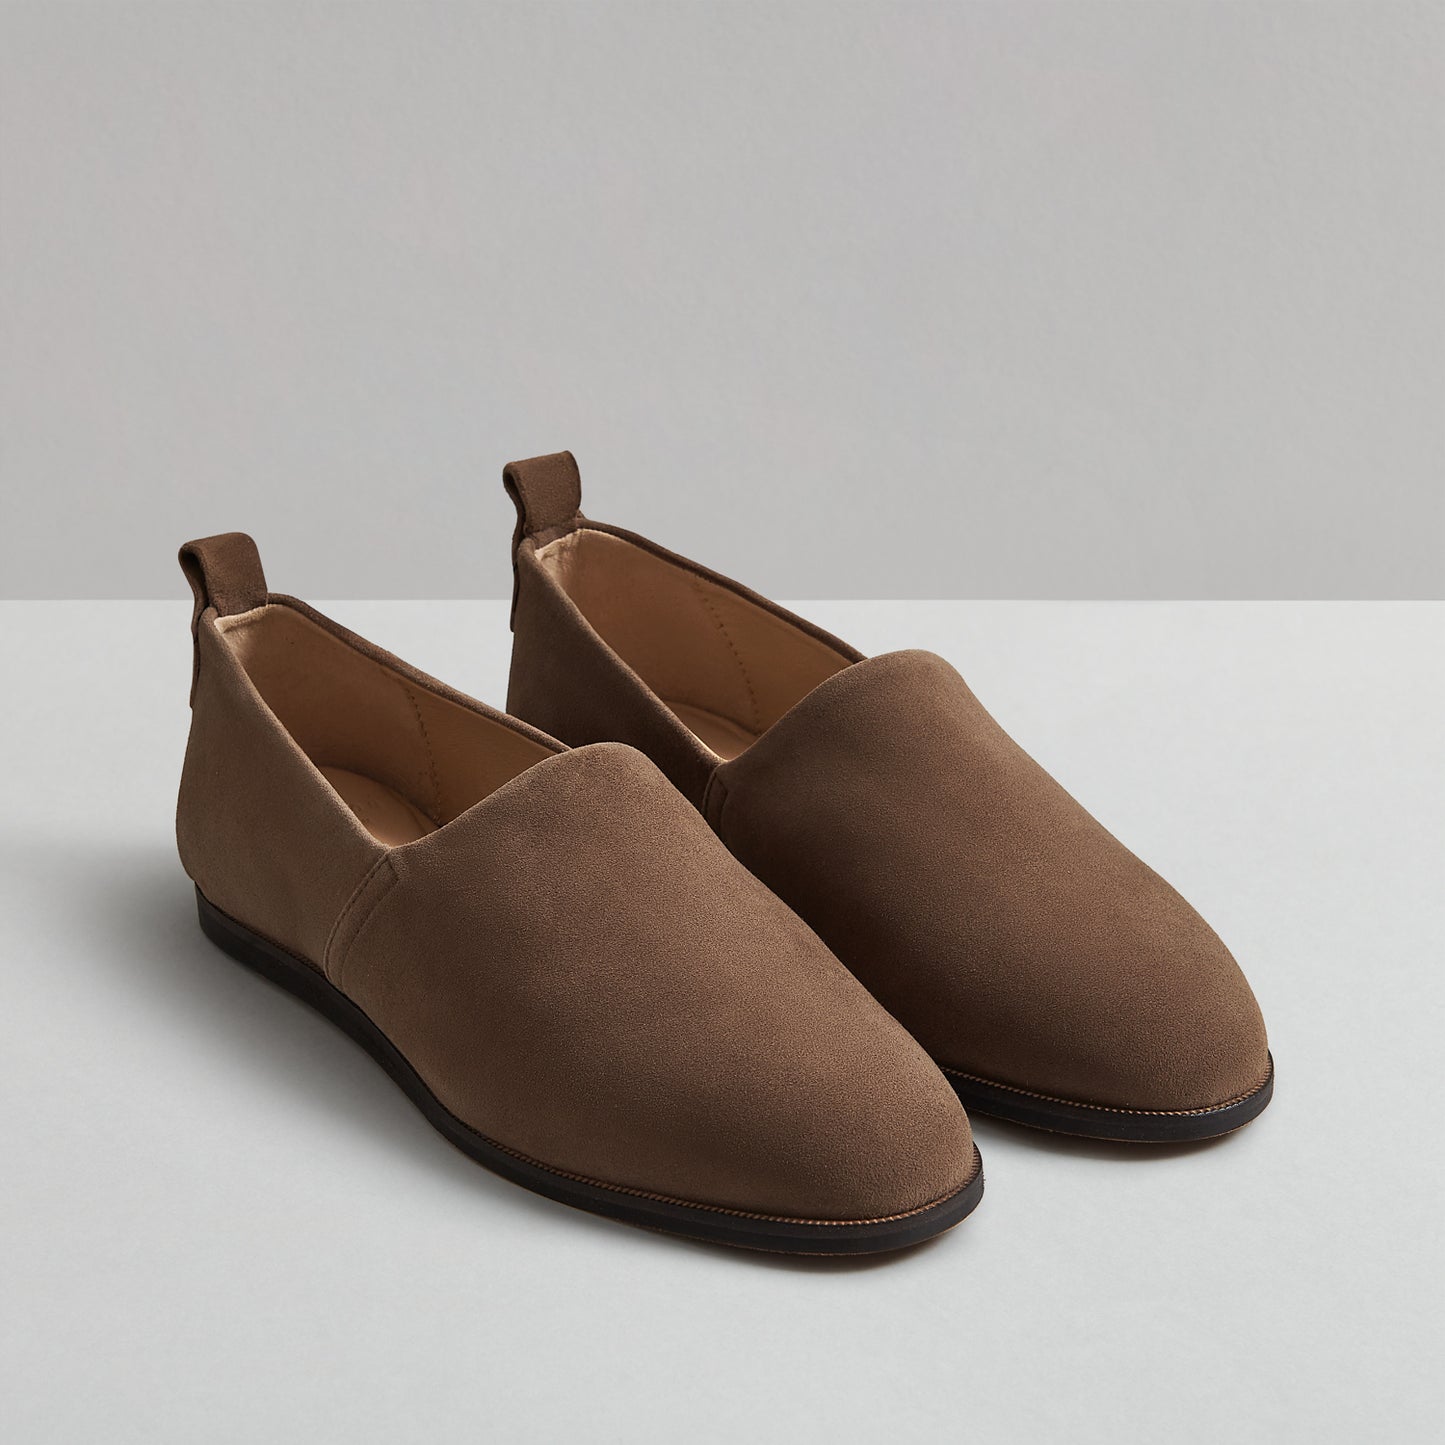 RIGBY KHAKI SUEDE LOAFER